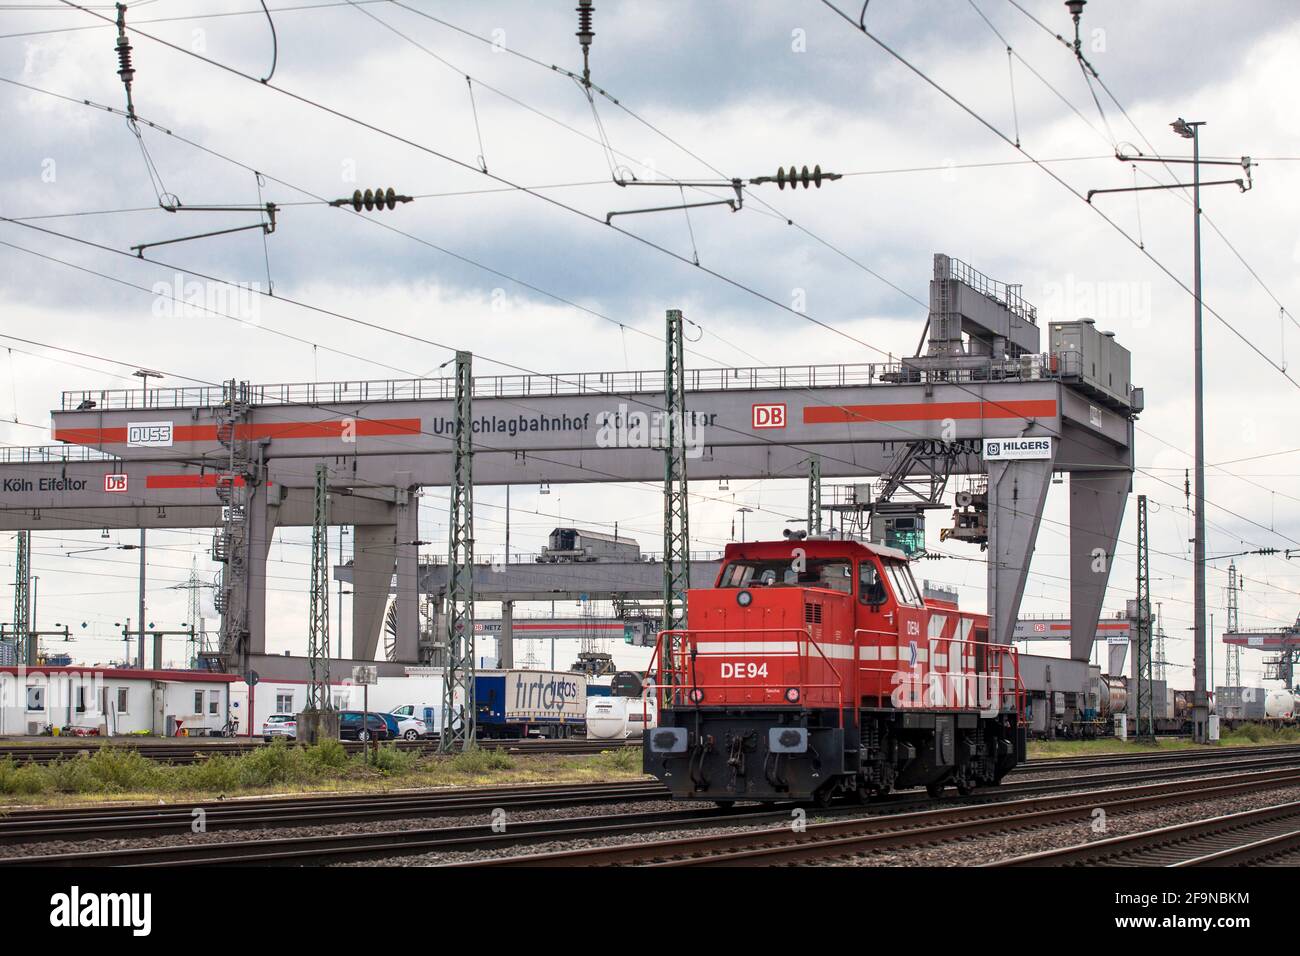 freight station Cologne Eifeltor, it is Germany's largest freight station for combined rail-road freight, Cologne, Germany. der Gueterbahnhof Koeln Ei Stock Photo